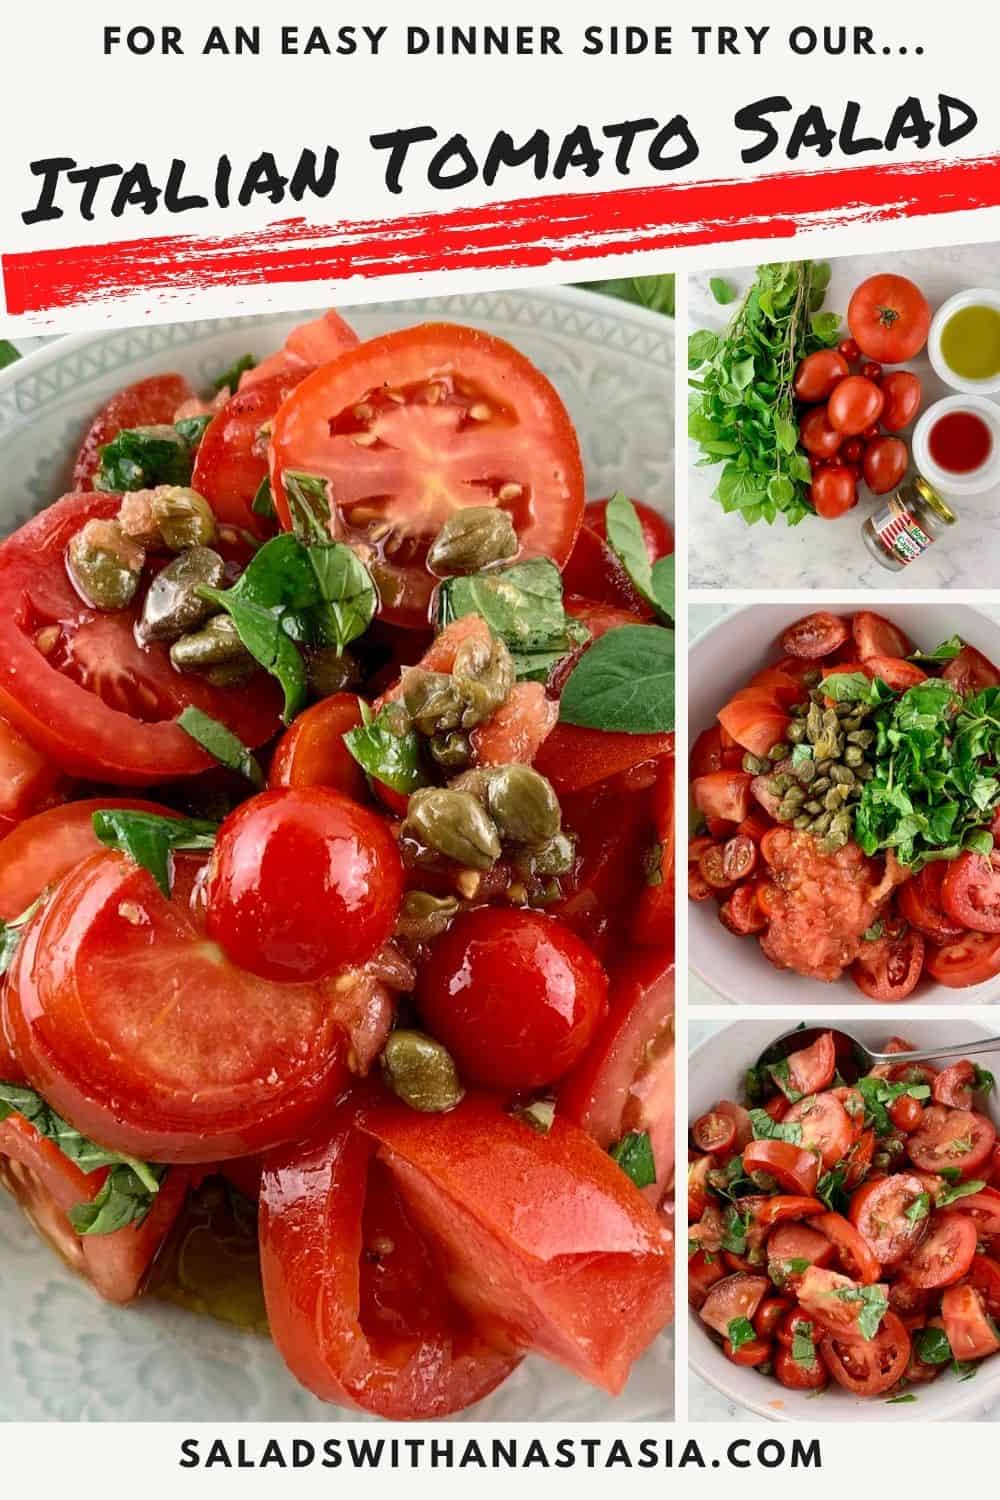 Italian tomato salad in a mint bowl with tomatoes and basil on the side & text overlay.